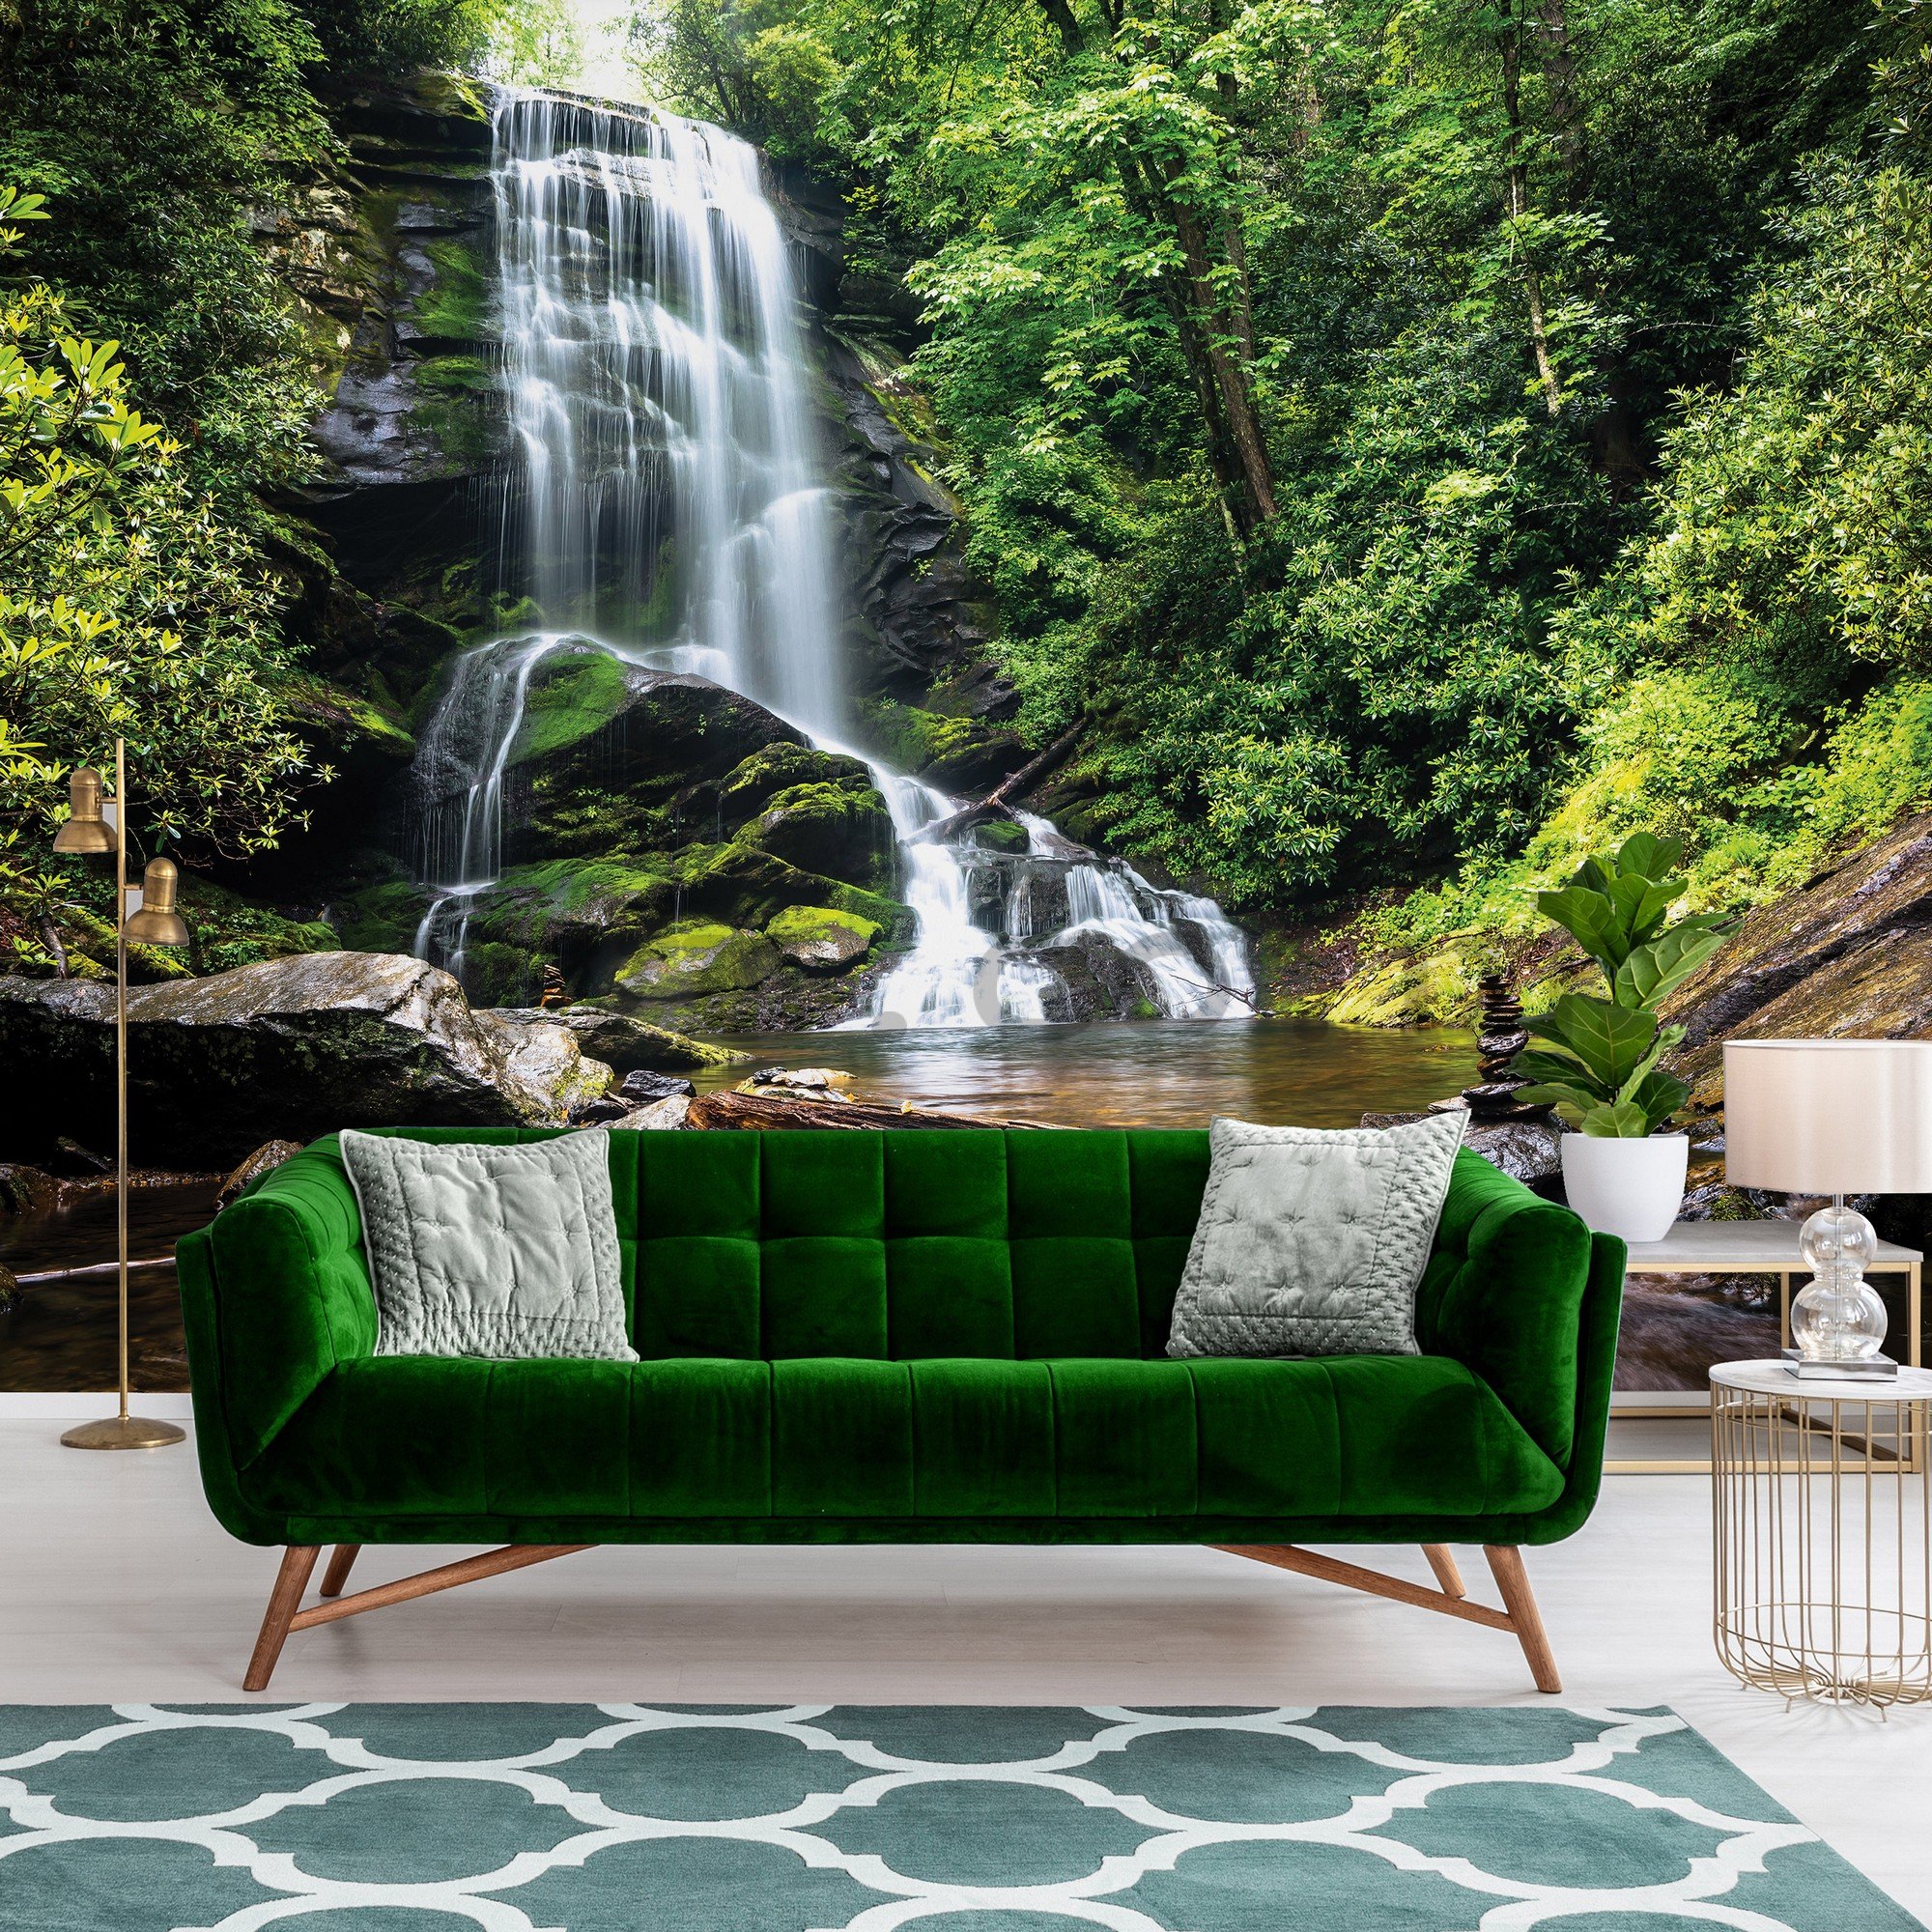 Wall mural vlies: White waterfall in the forest - 368x254 cm